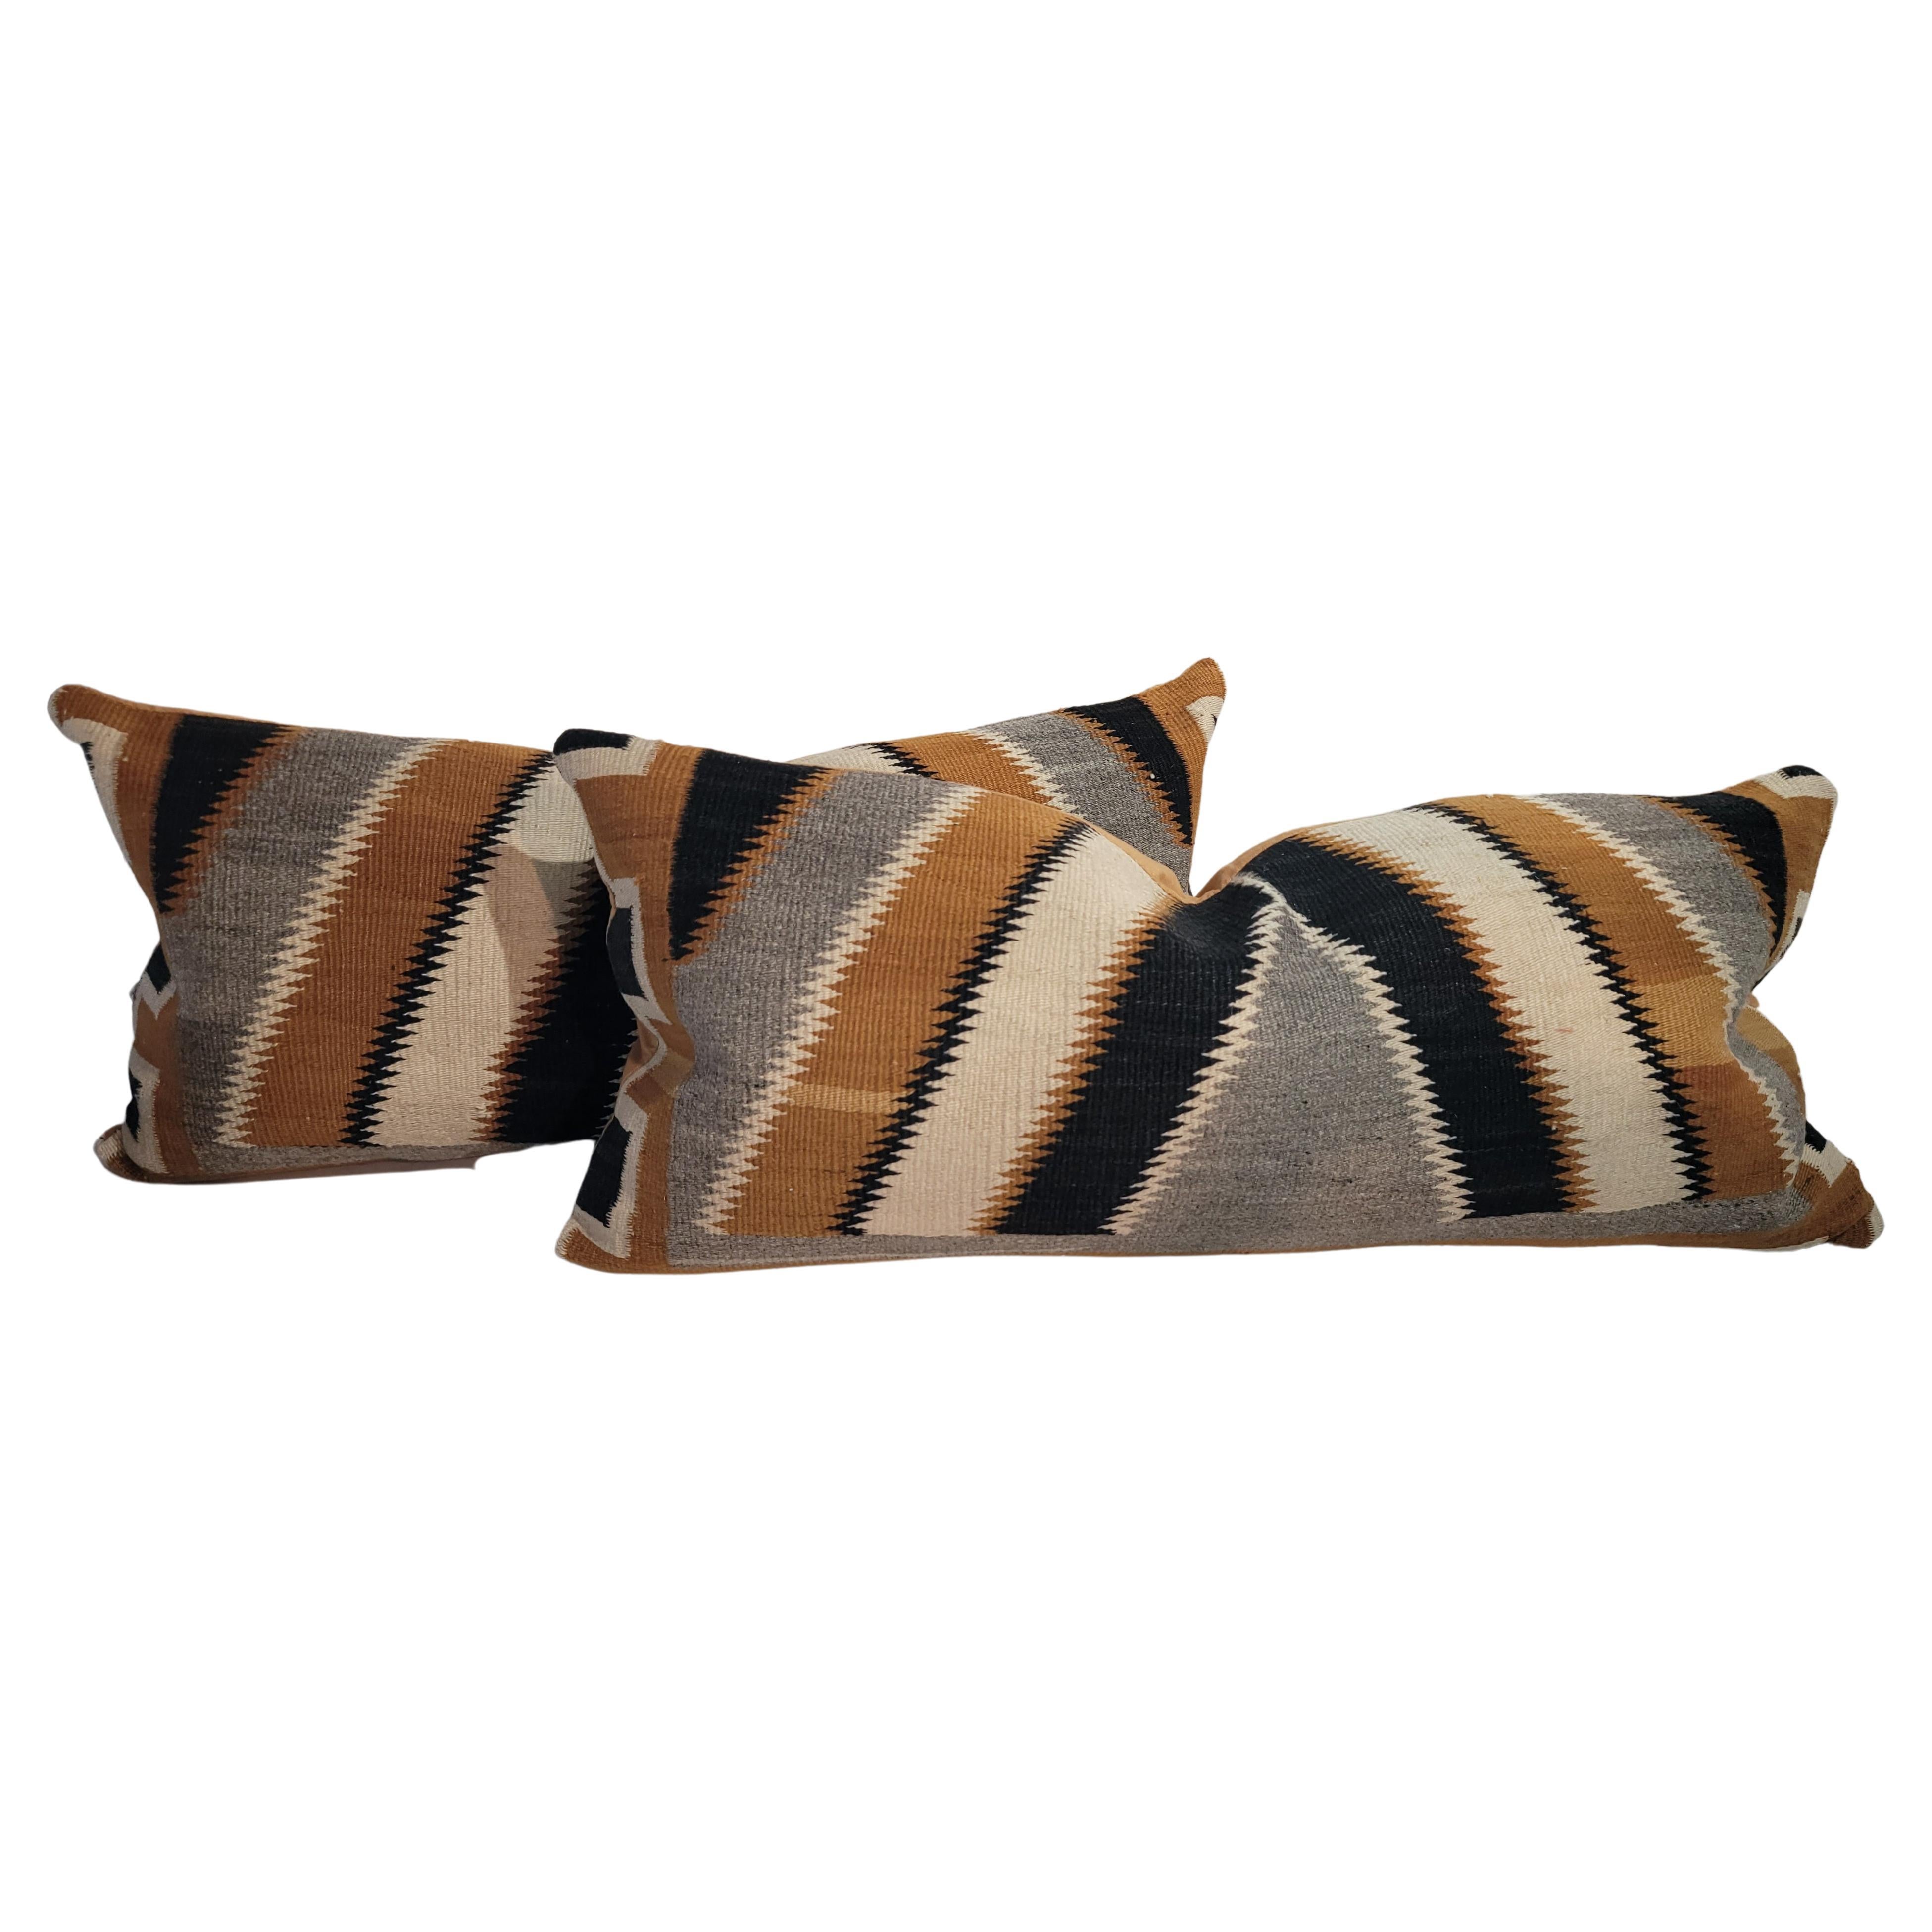 Early 20thc Navajo Indian Weaving Bolster Pillows, Pair For Sale